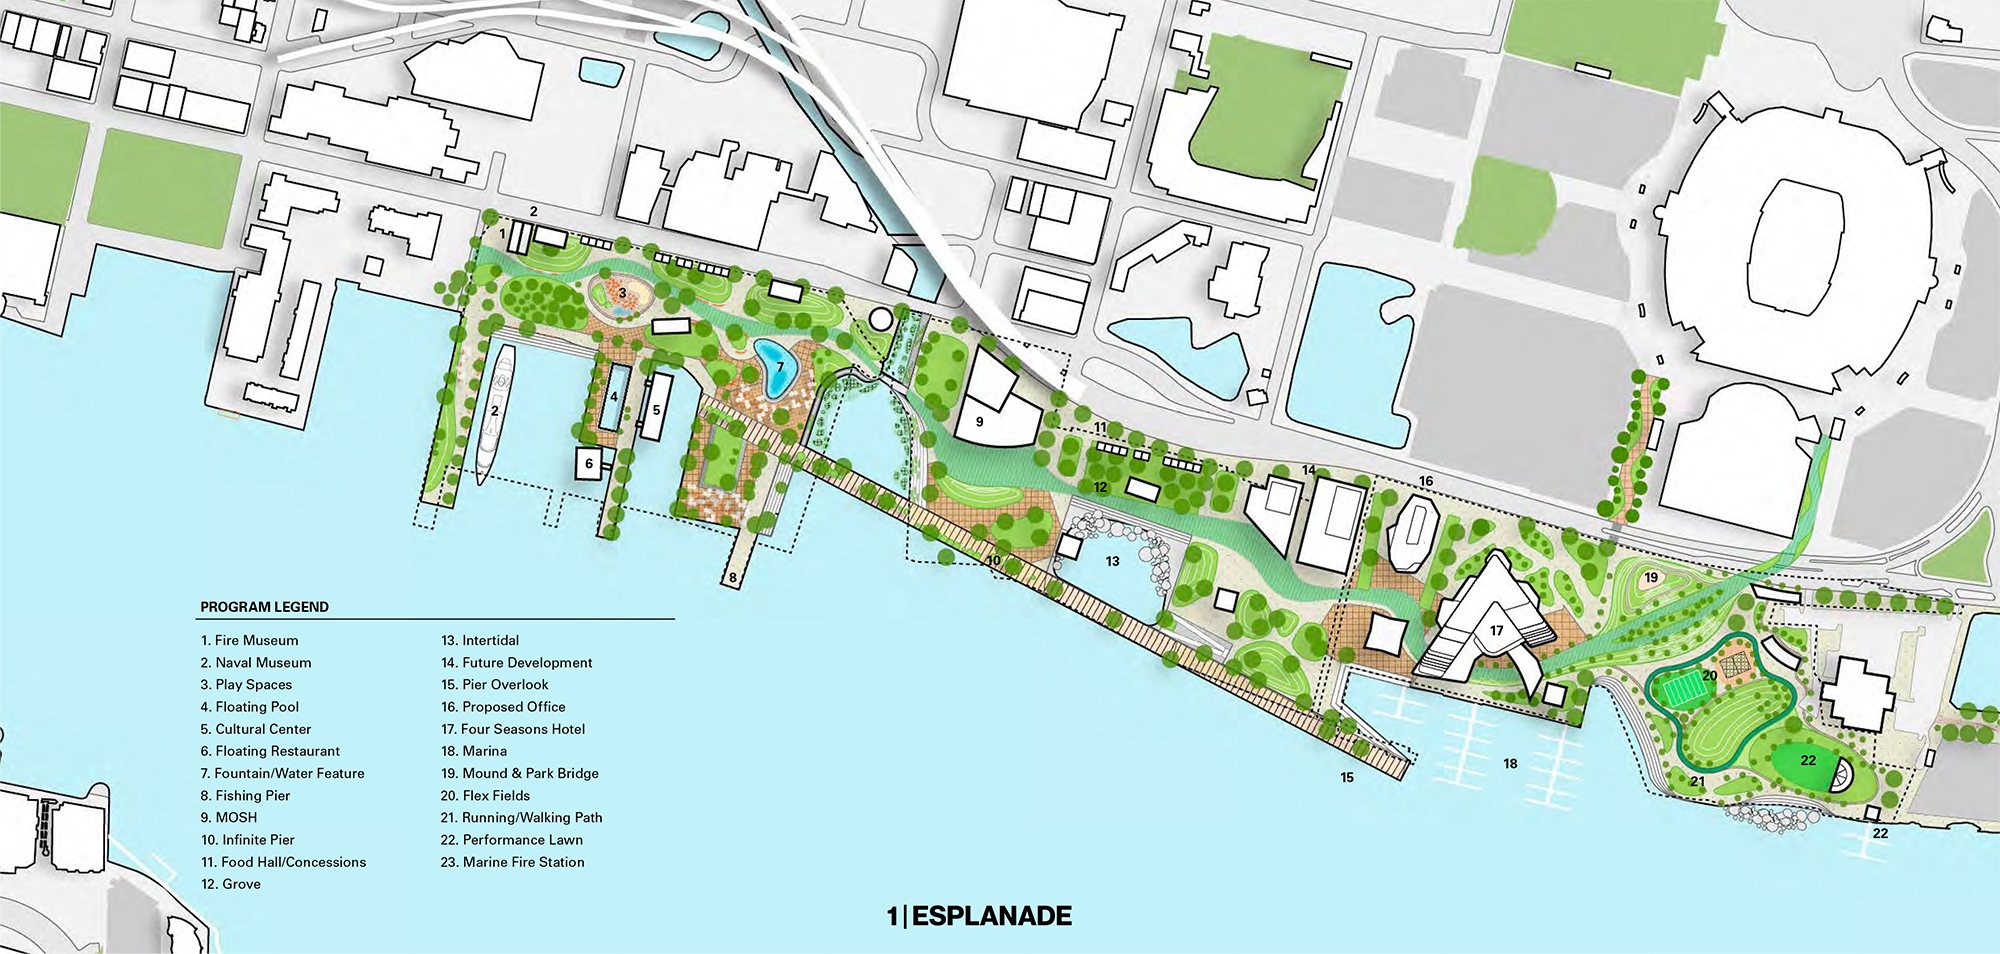 The park also is included in an esplanade plan developed by the Jessie Ball duPont Fund as part of its $500,000 riverfront development study in 2021.